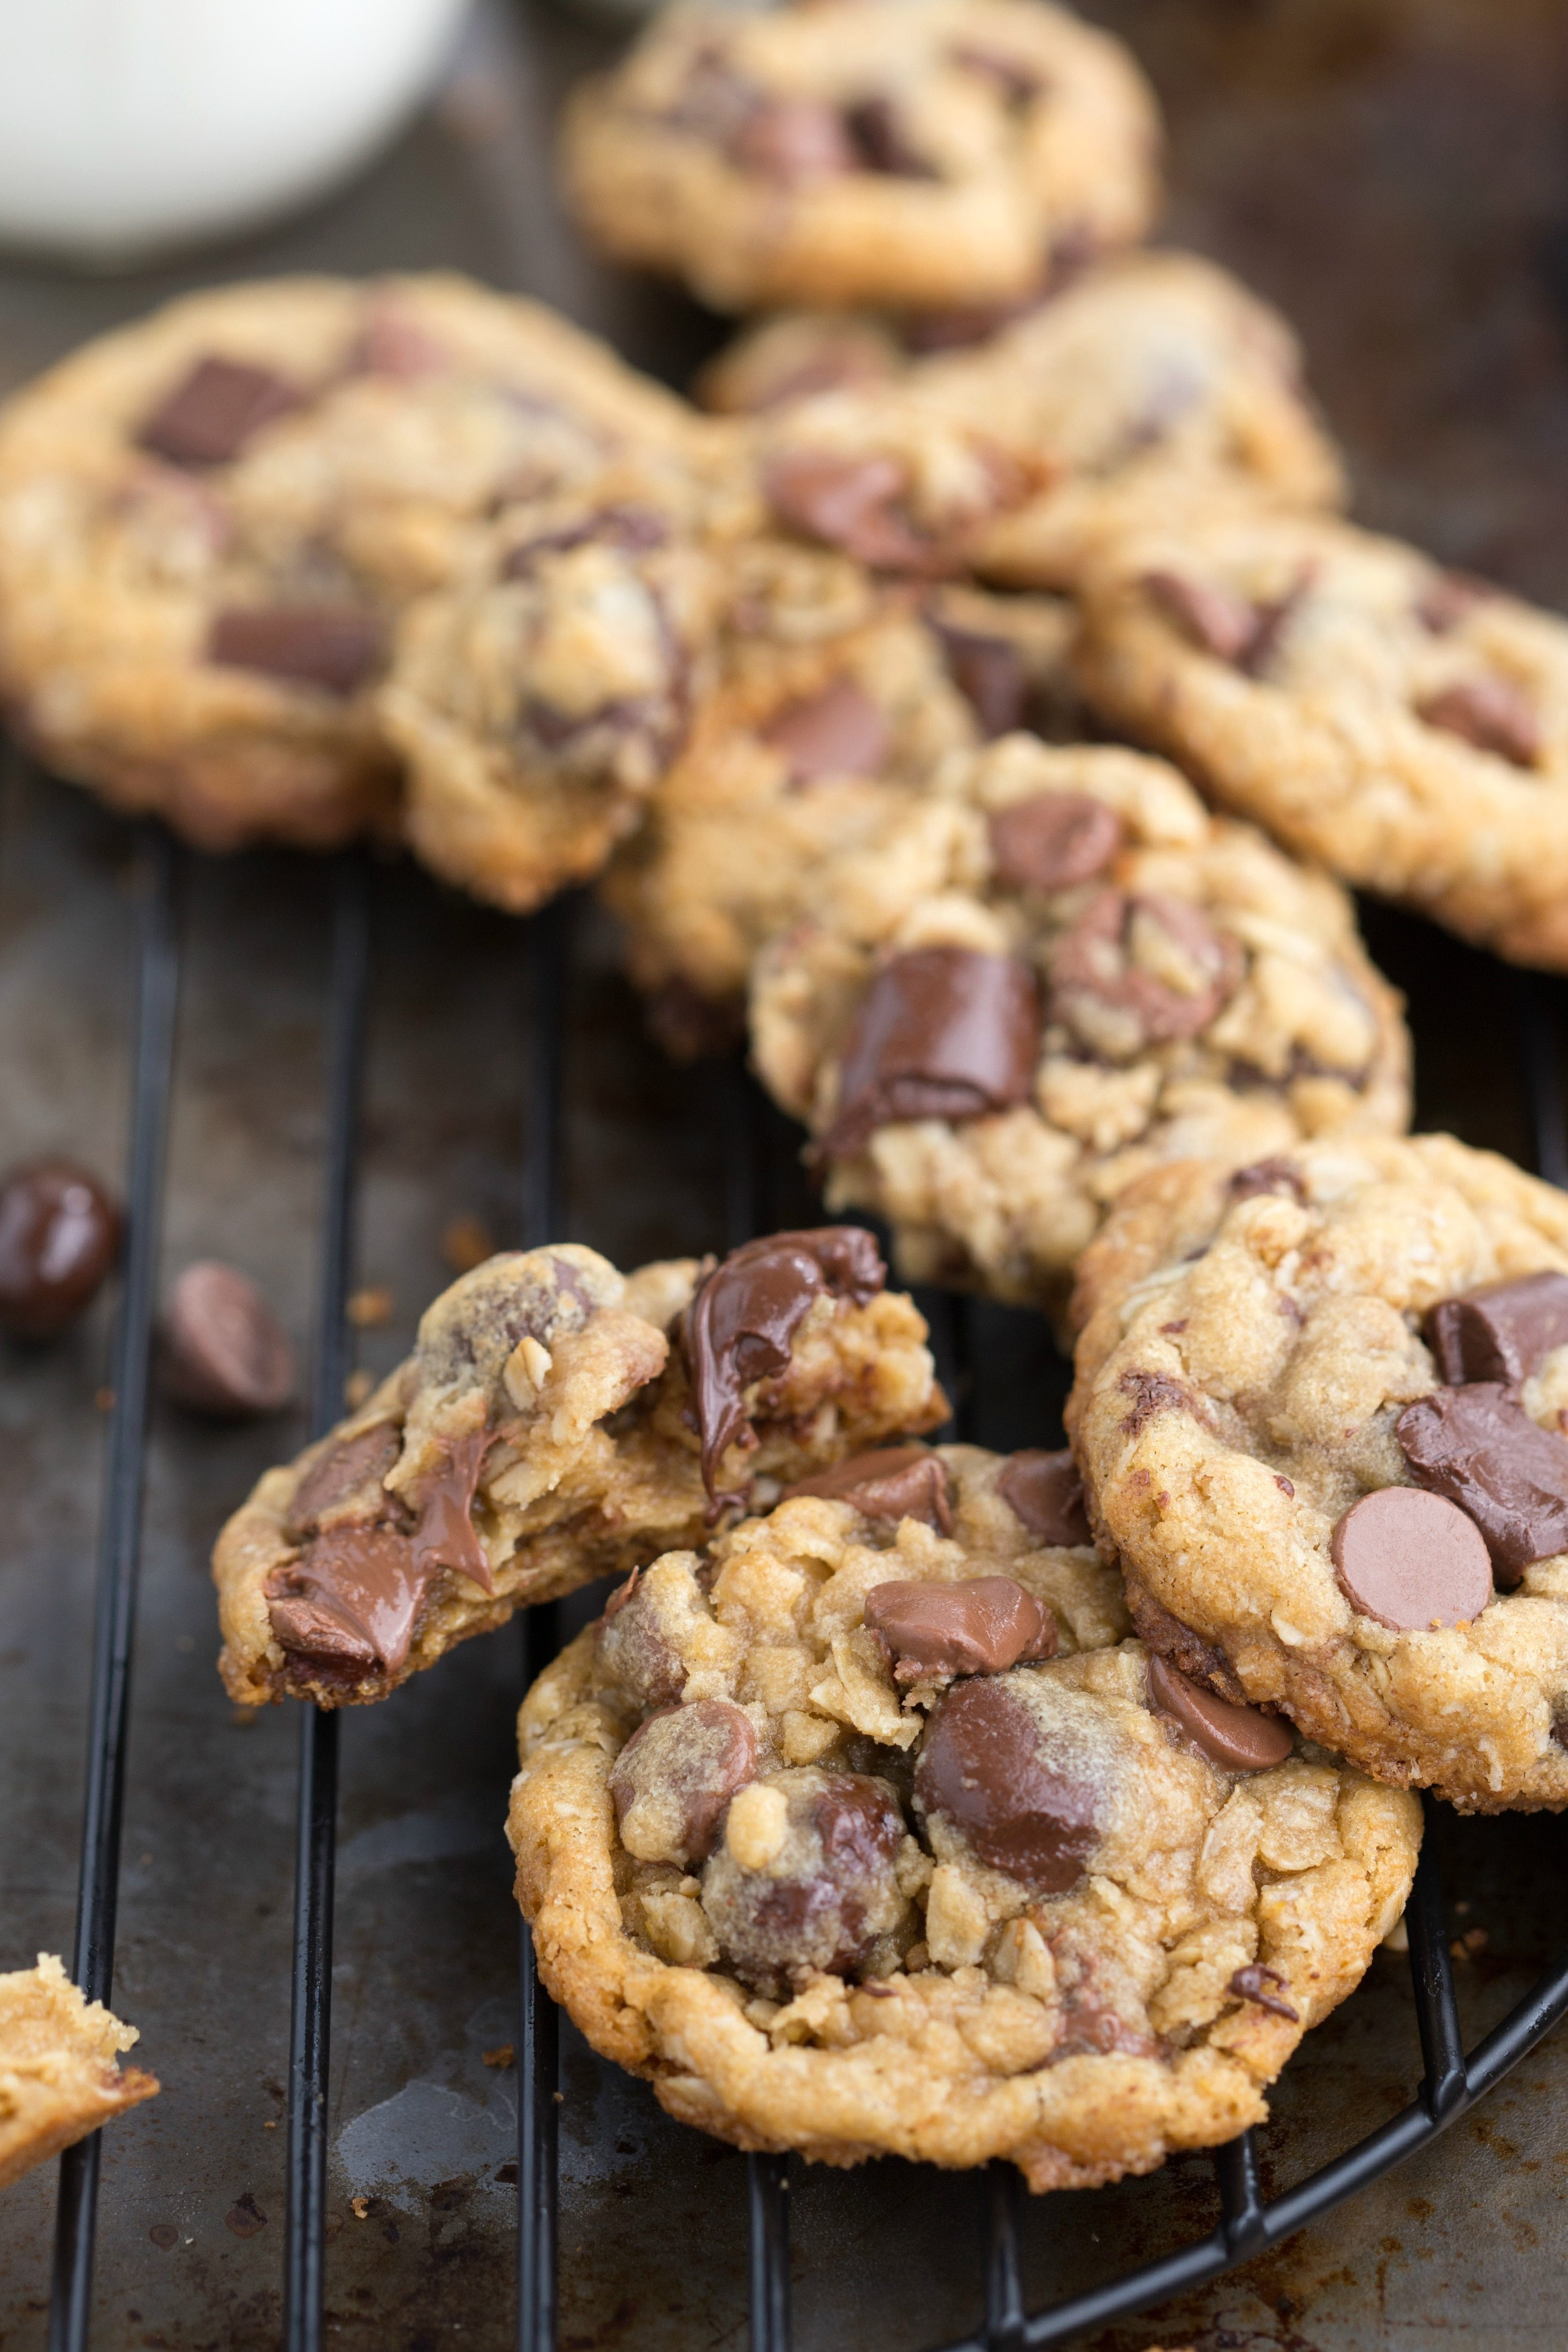 Chocolate Chip Oatmeal Cookies Healthy
 Healthier Oatmeal Chocolate Chip Cookies with Dark